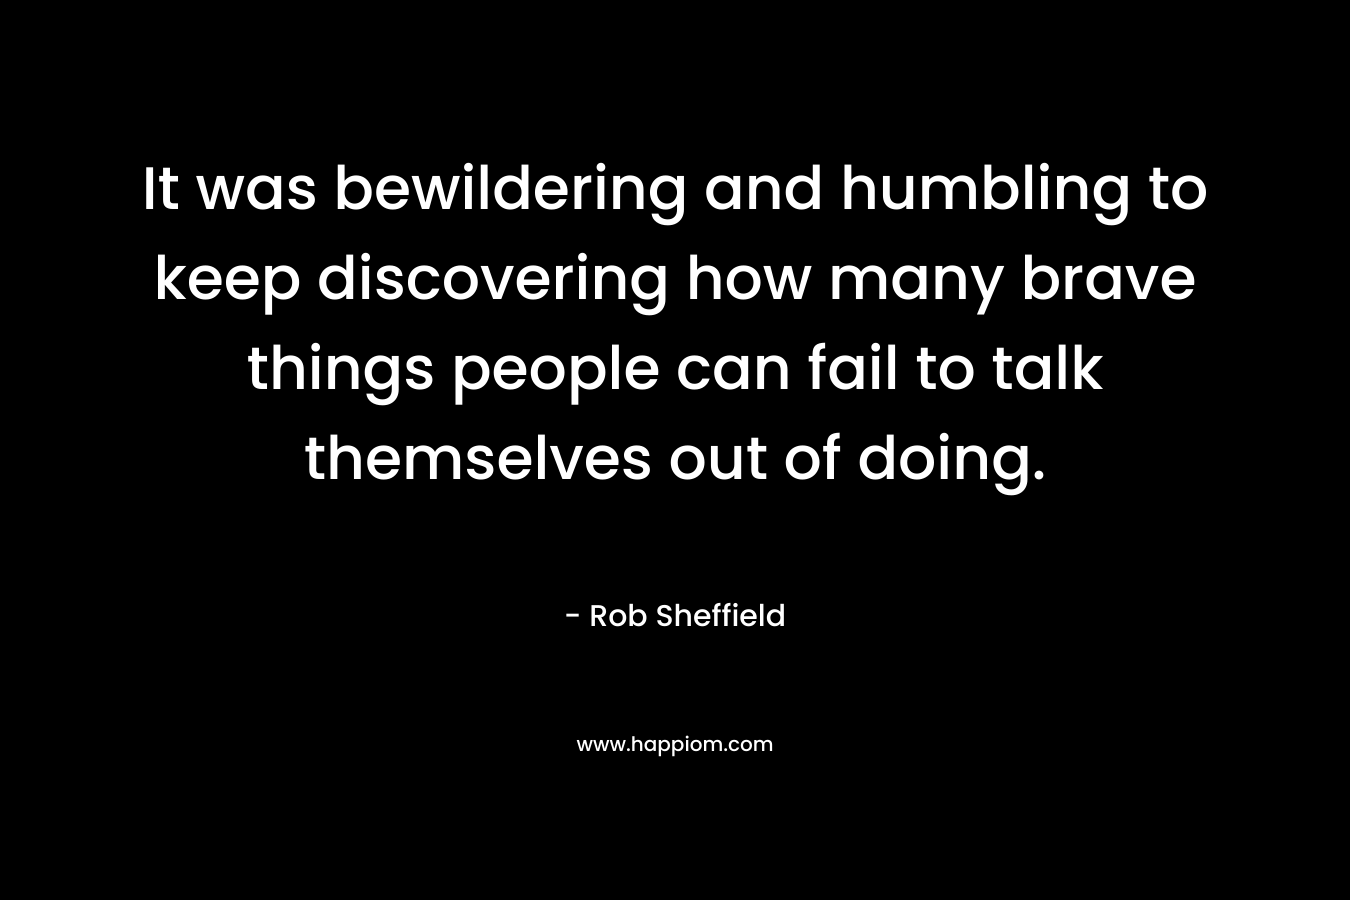 It was bewildering and humbling to keep discovering how many brave things people can fail to talk themselves out of doing. – Rob Sheffield